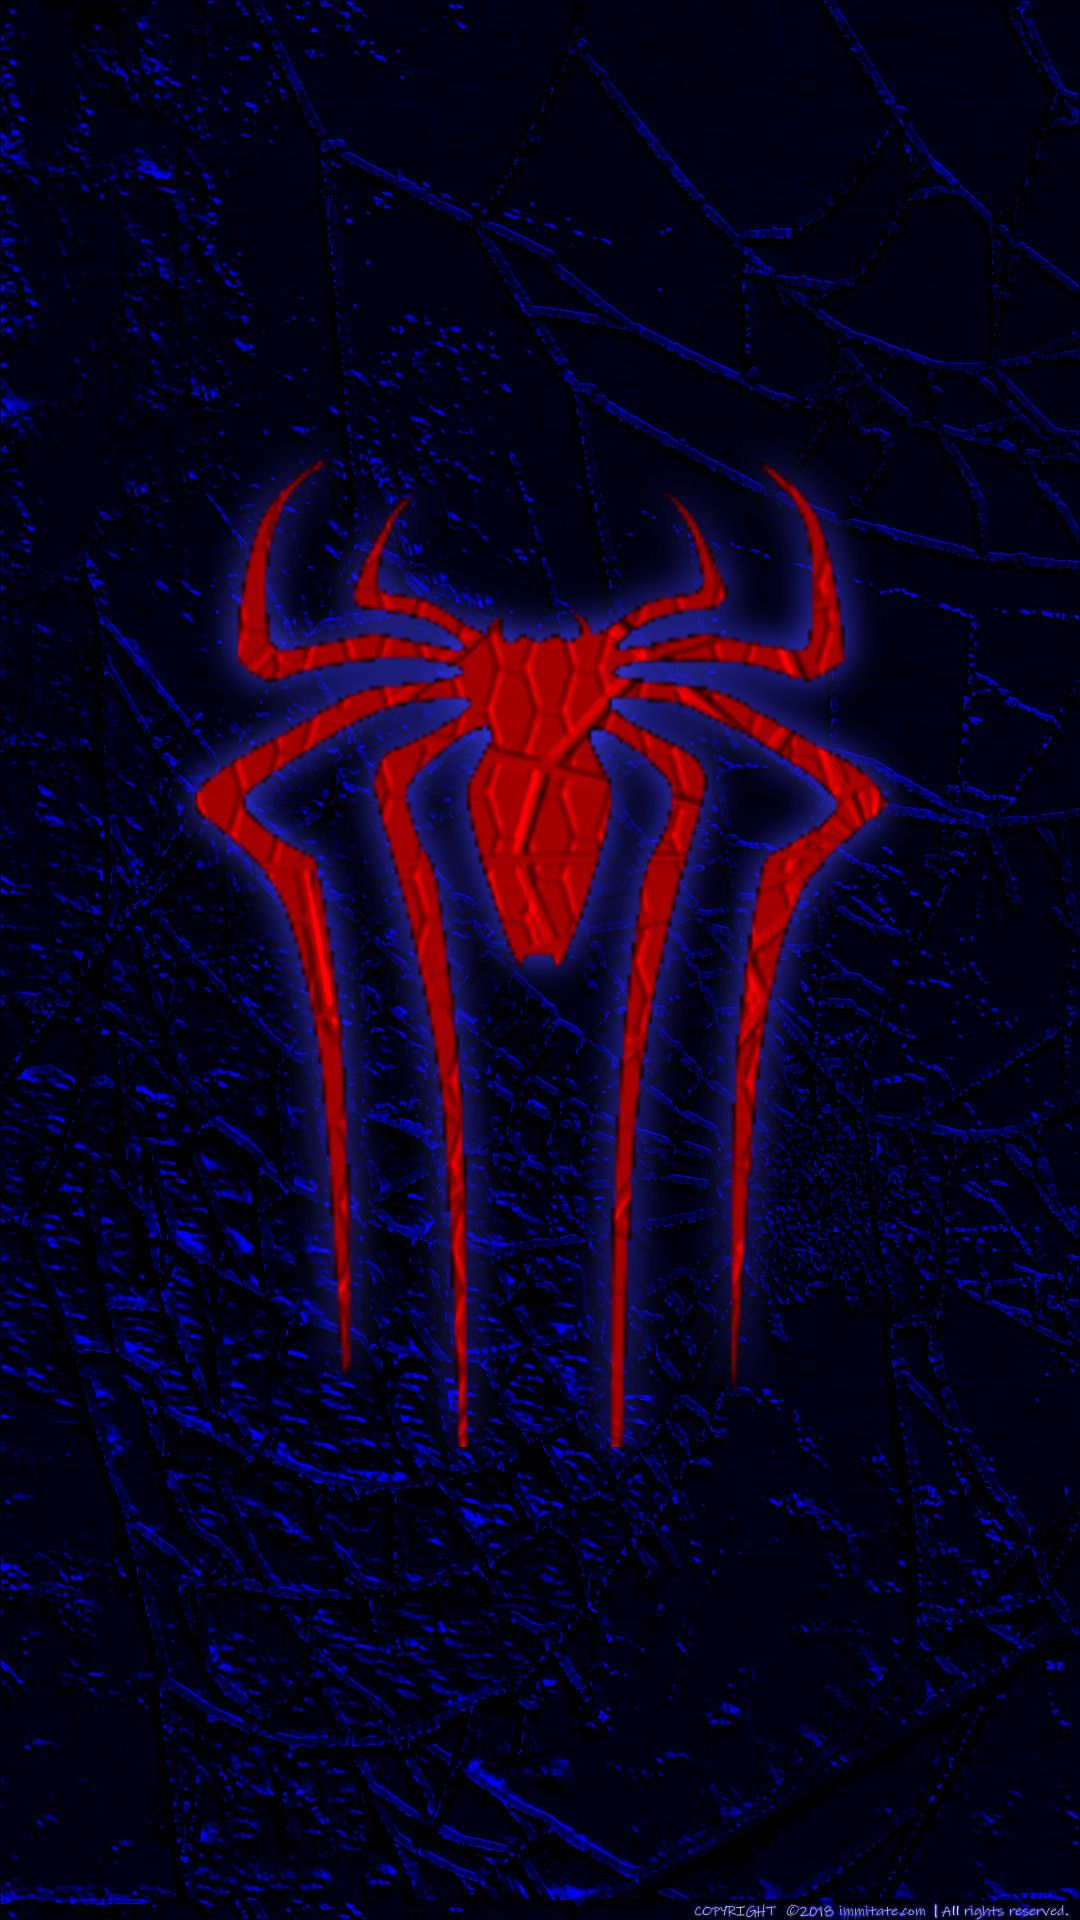 Featuring Spider Man, The Incredible Hulk, Venom, And Wallpaper & Background Download